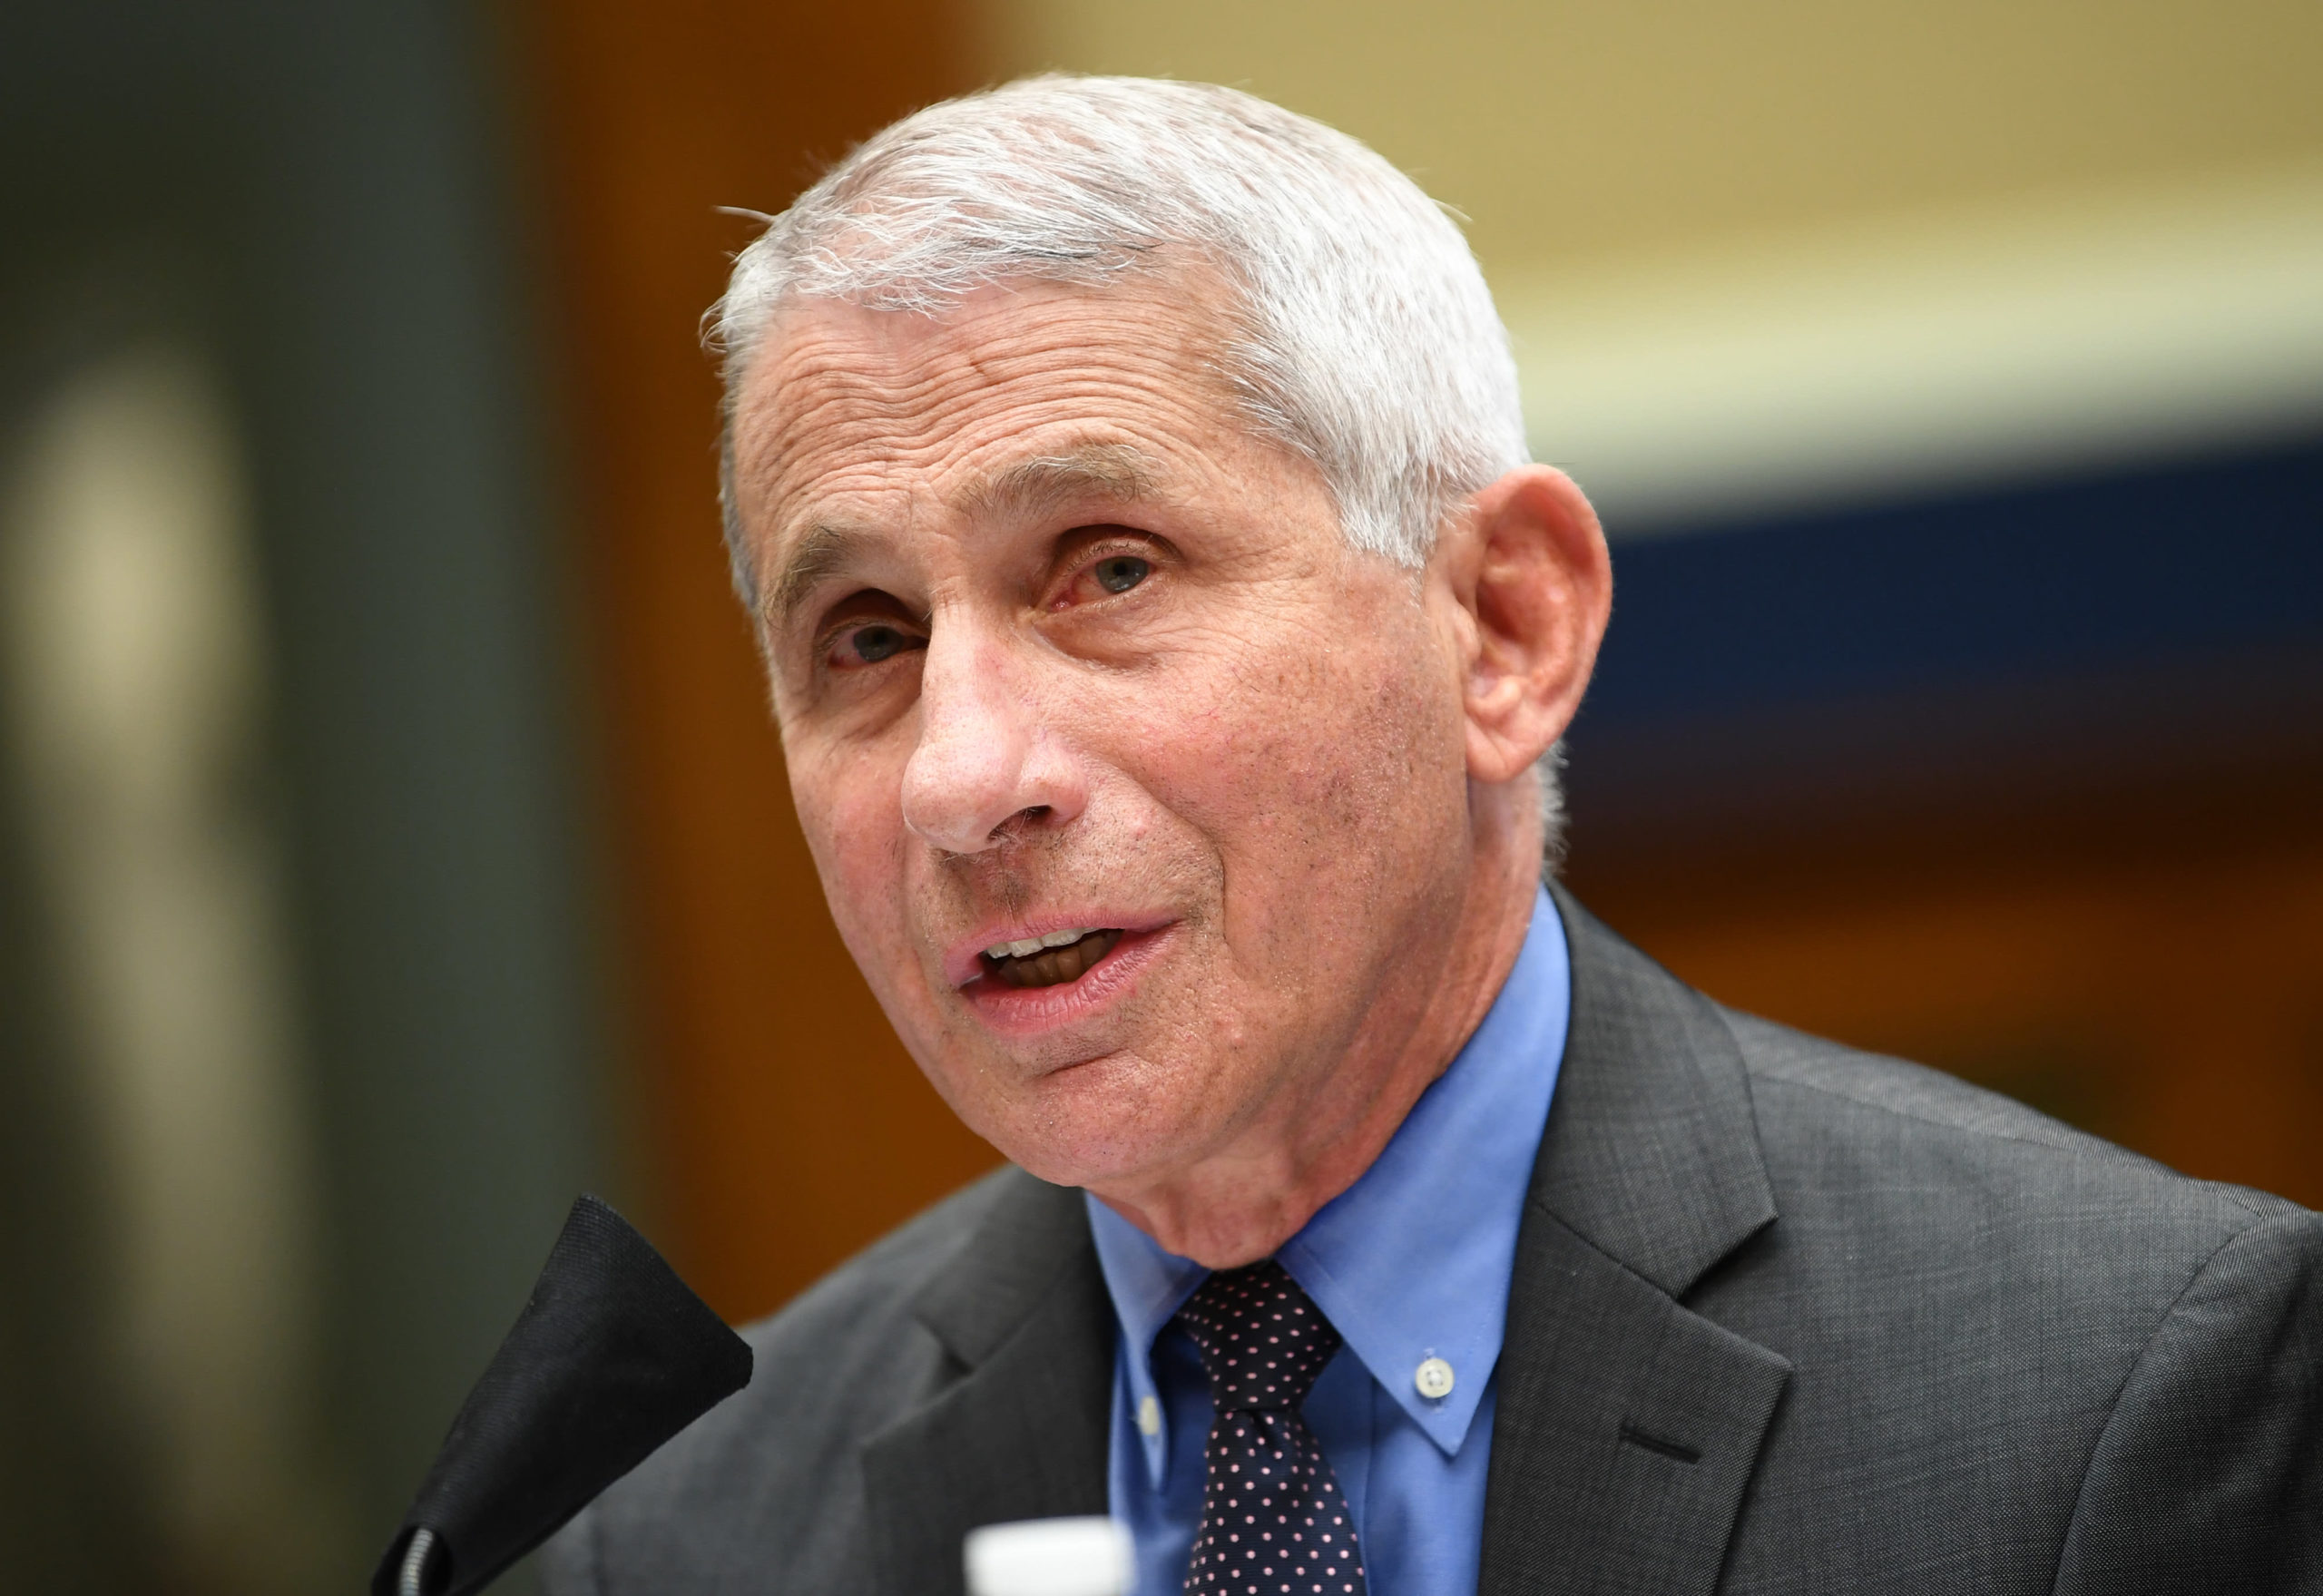 Dr. Fauci says all of the ‘legitimate’ scientific information reveals hydroxychloroquine is not efficient in treating coronavirus